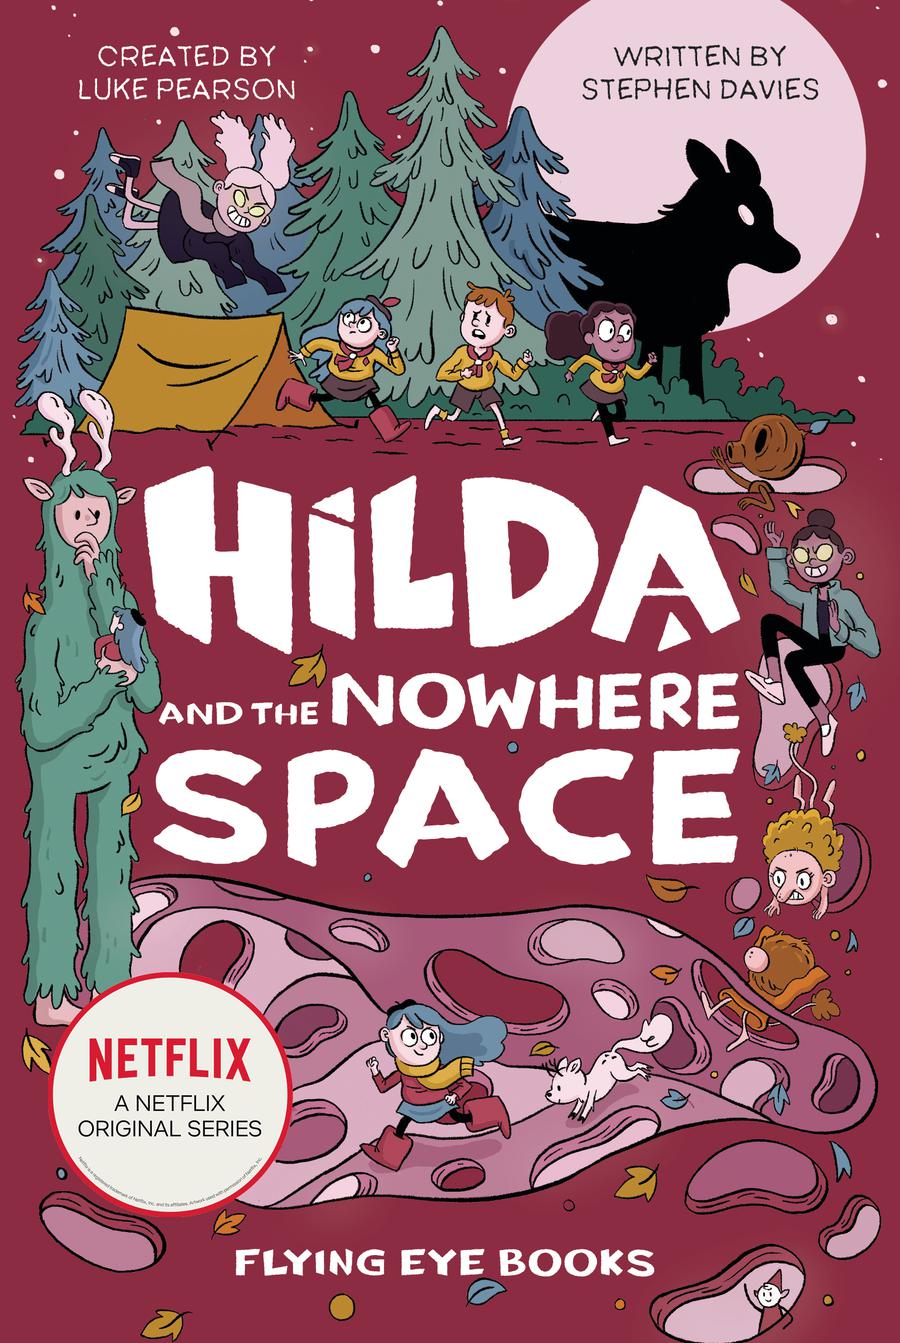 Hilda And The Nowhere Space Netflix Tie-In Novel HC